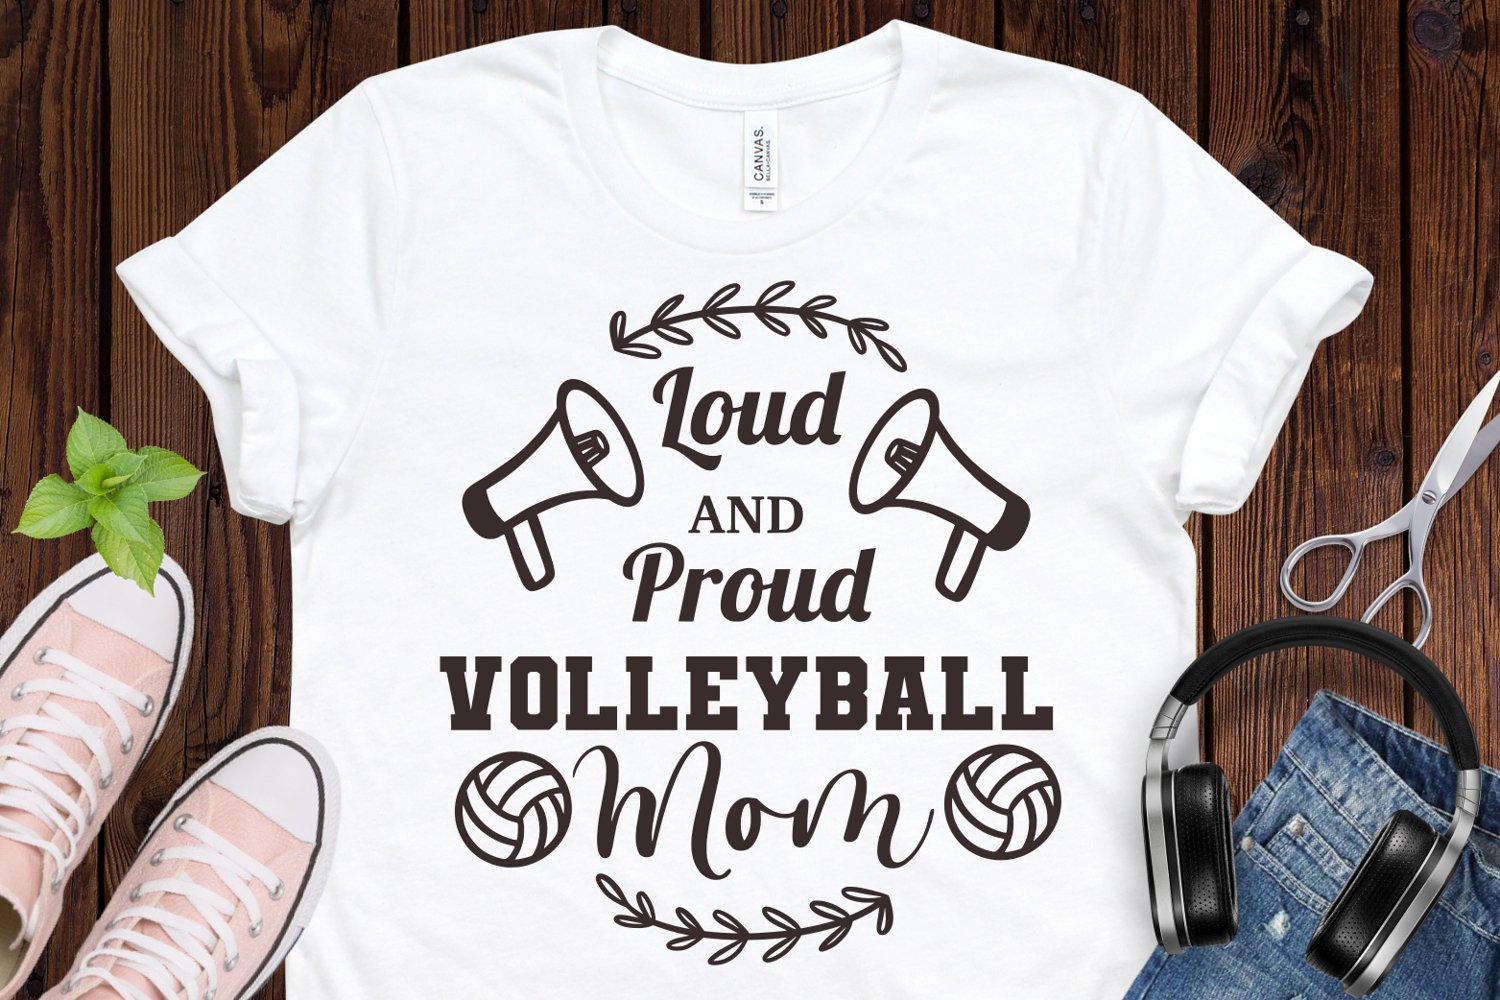 Loud and proud volleyball mom - t-shirt design.